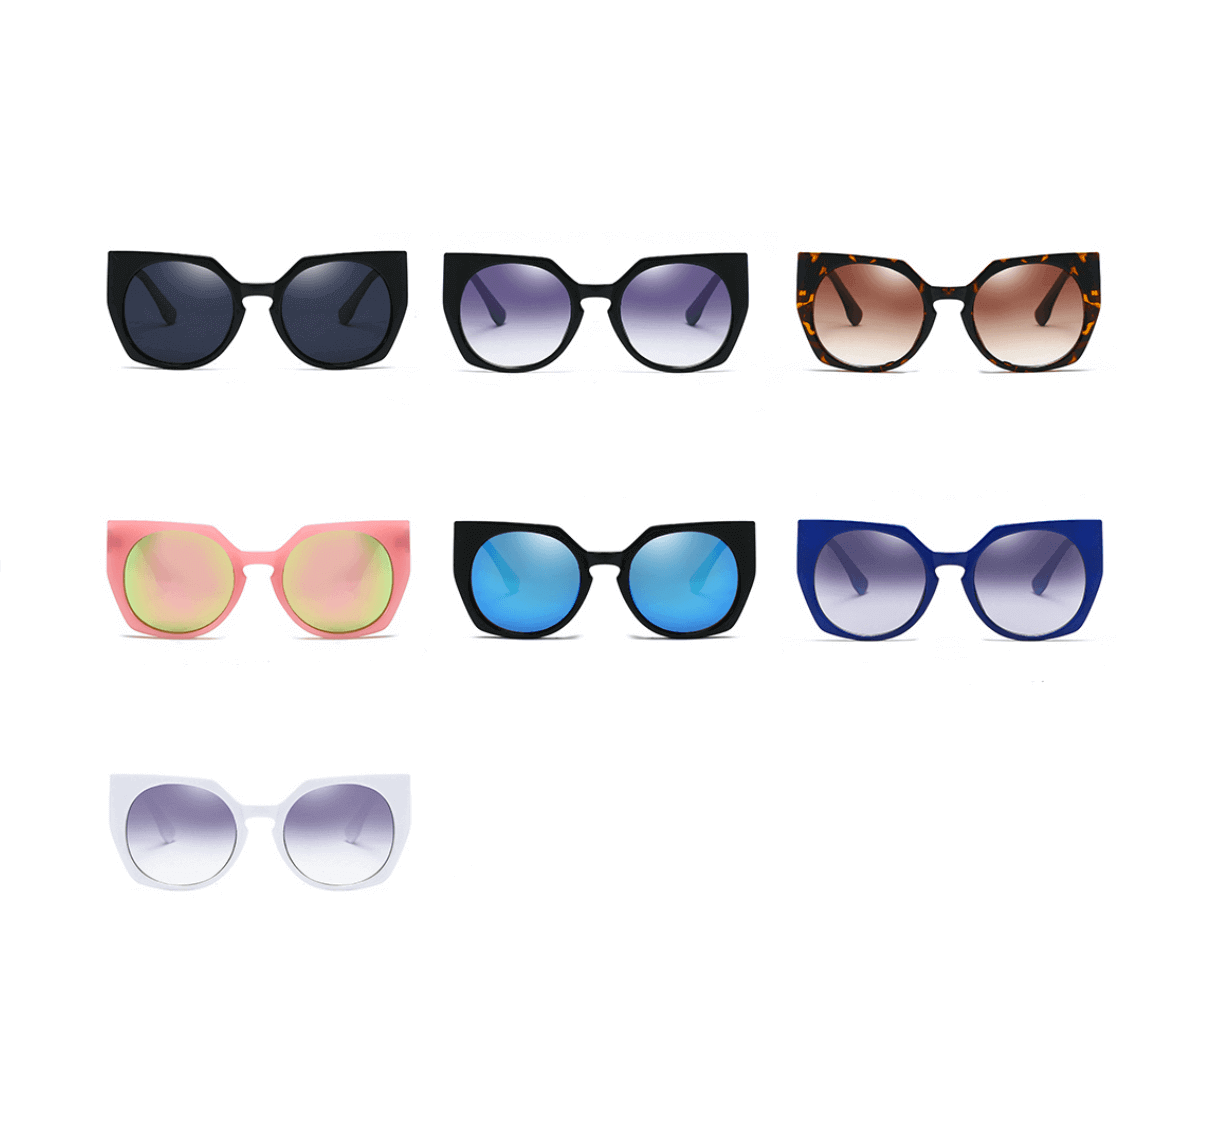 Buy John Lennon Colored Sunglasses 12 Pairs (colors vary)(Discontinued by  manufacturer) at Amazon.in